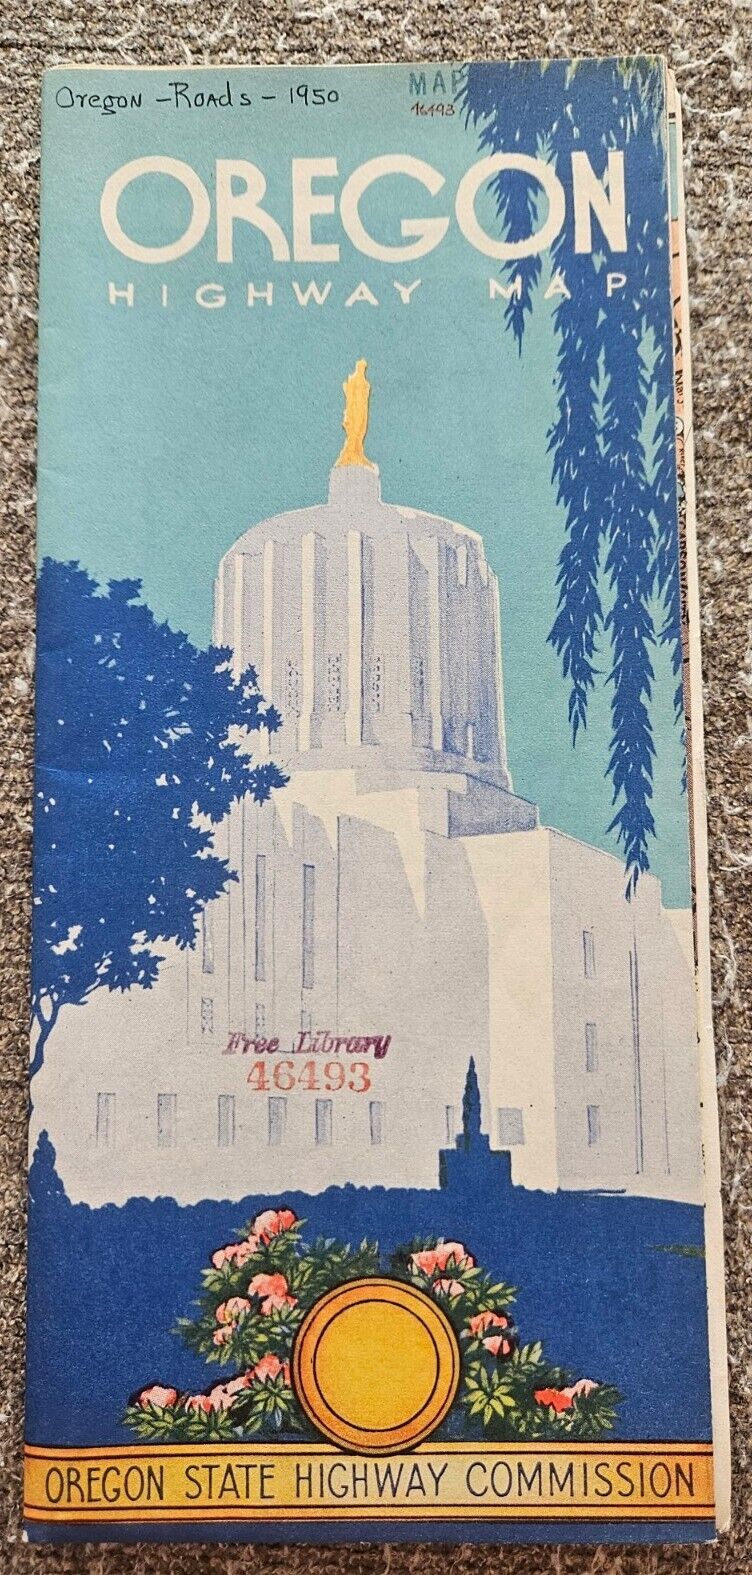 1950 Oregon State Highway Commission Road Map